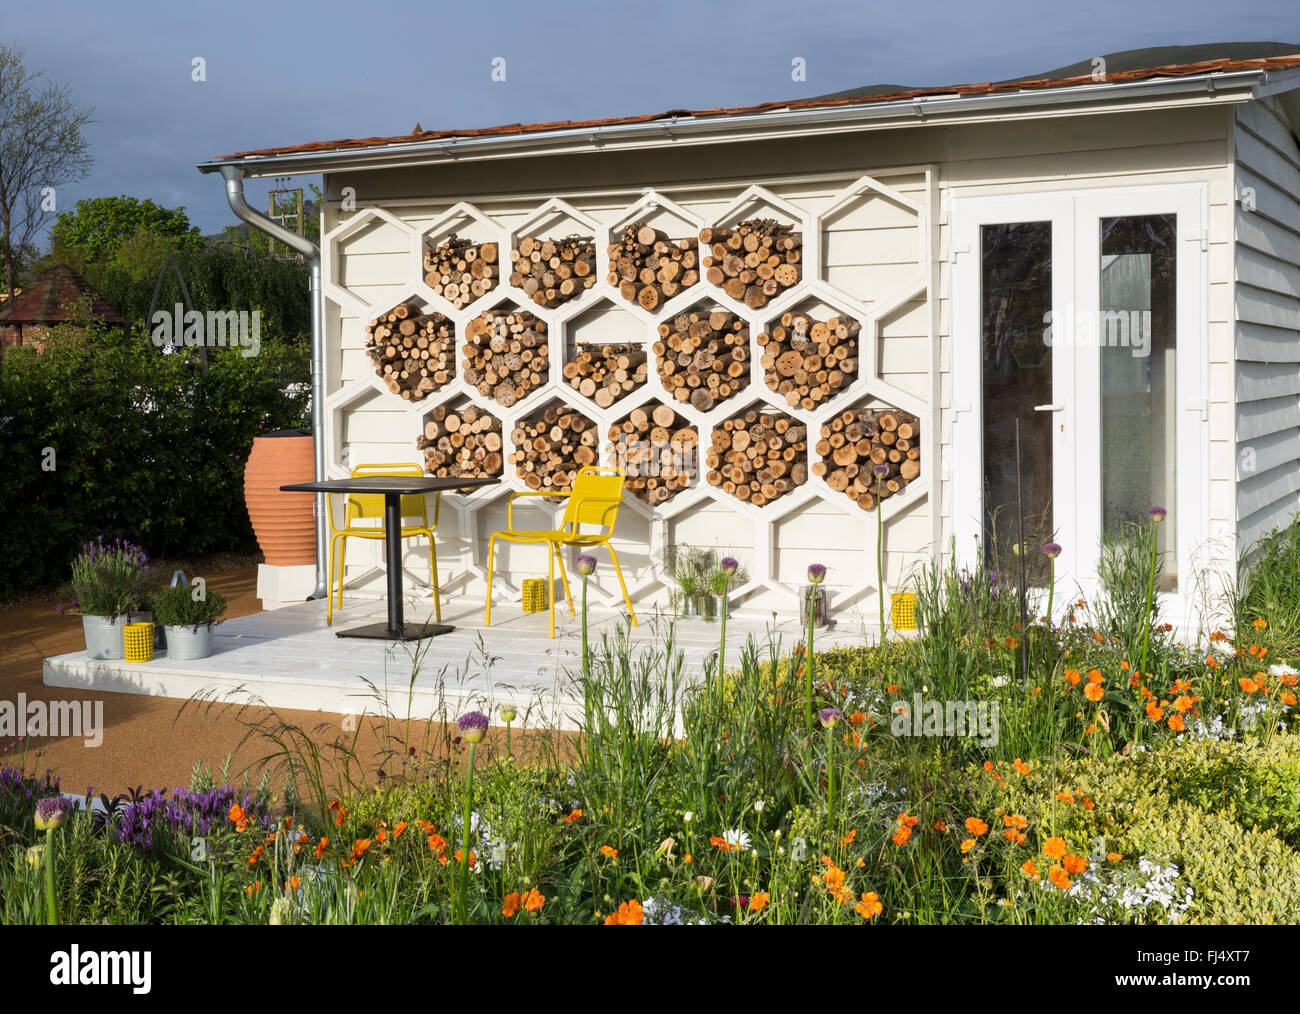 Garden summerhouse office hexagonal structures insect bug hotel motel habitat wooden deck with table chairs, bee garden planting, flower borders UK Stock Photo